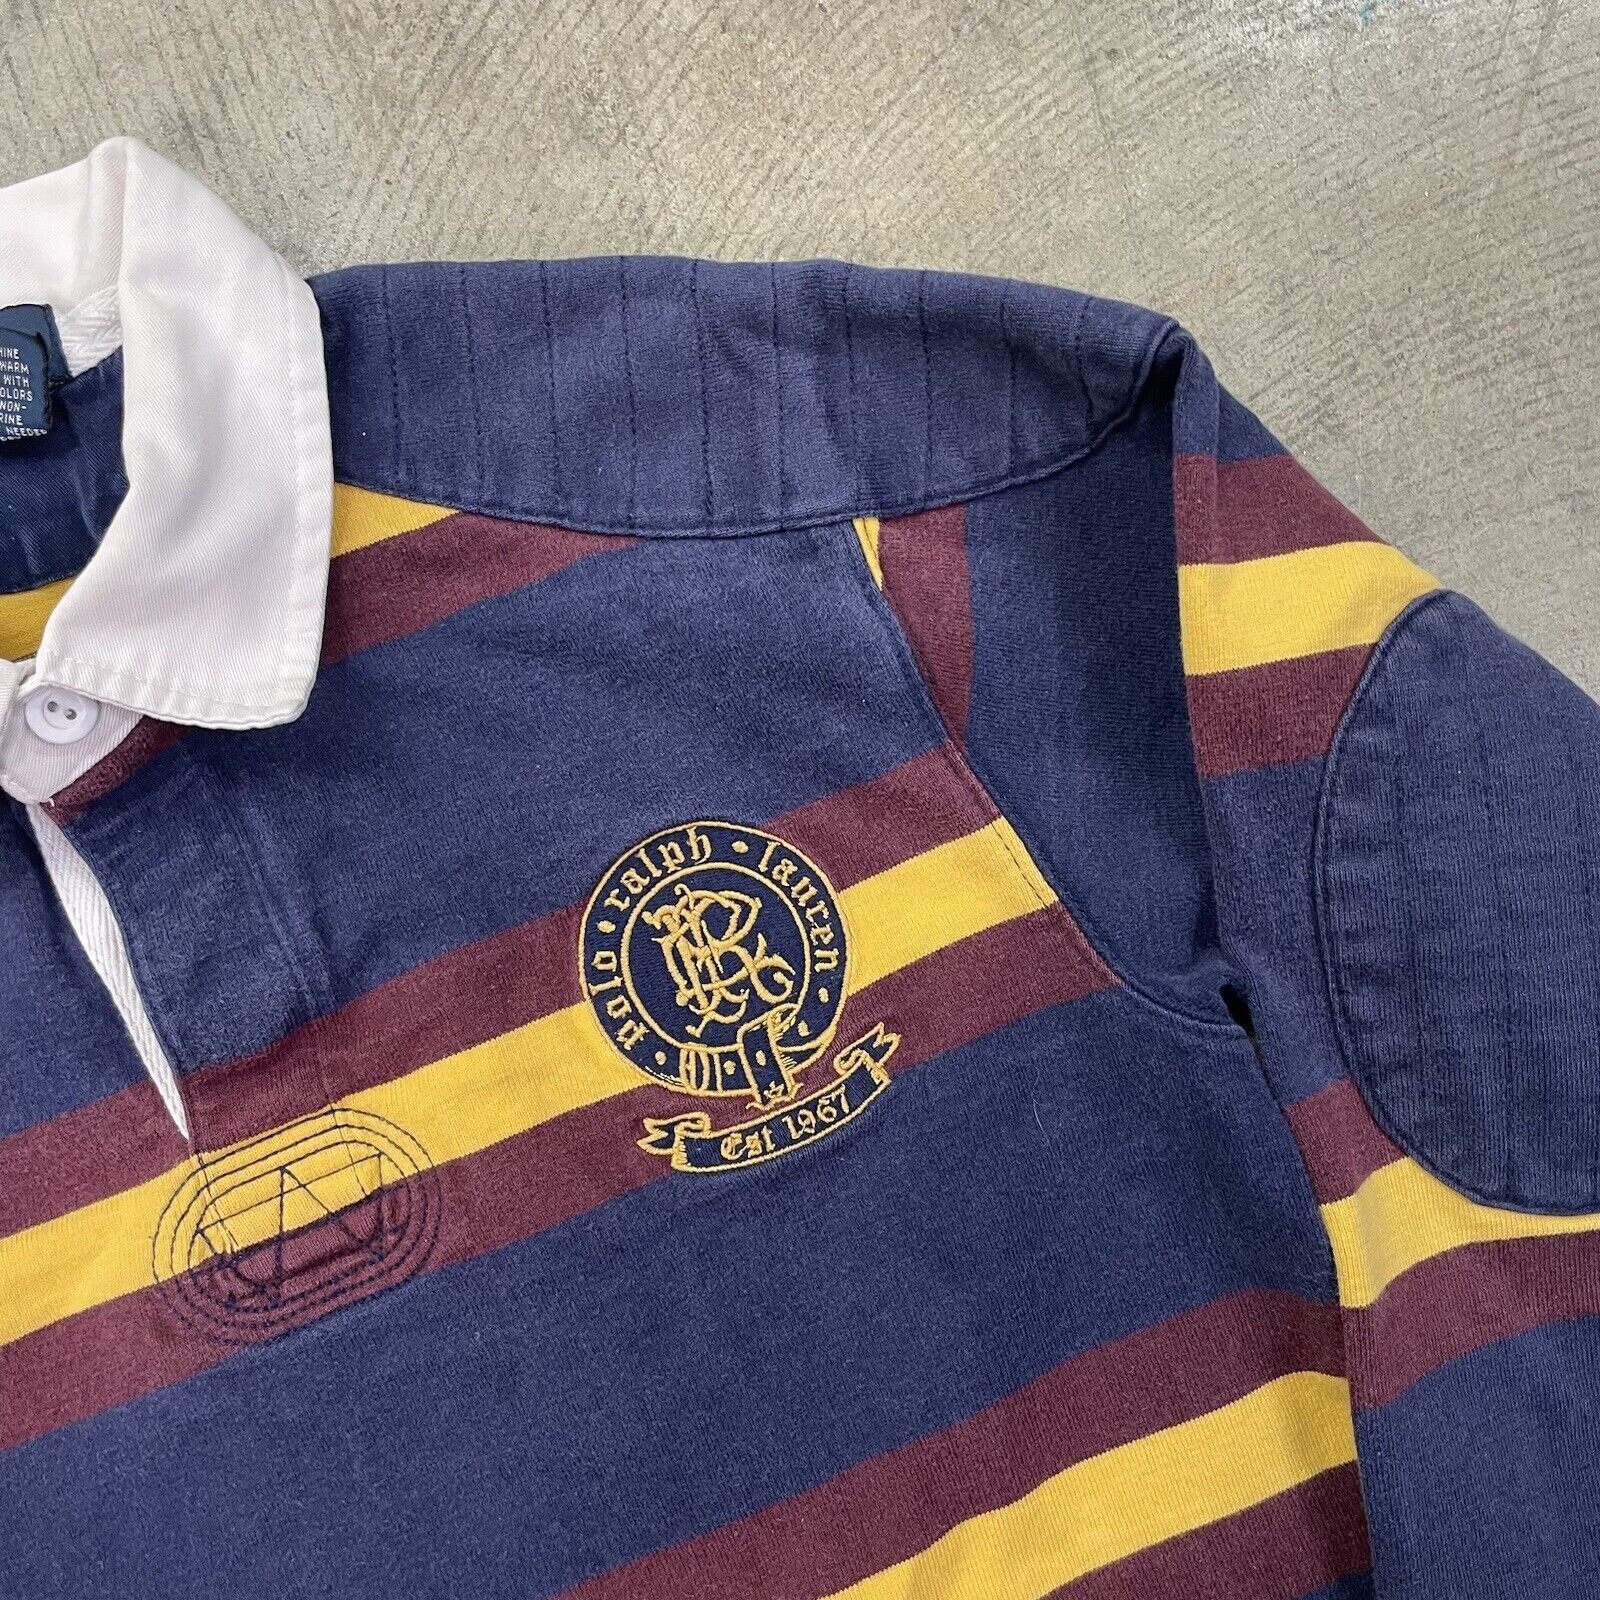 Ralph Lauren Polo Rugby Shirt 90s Long Sleeve Top Navy Blue - Etsy